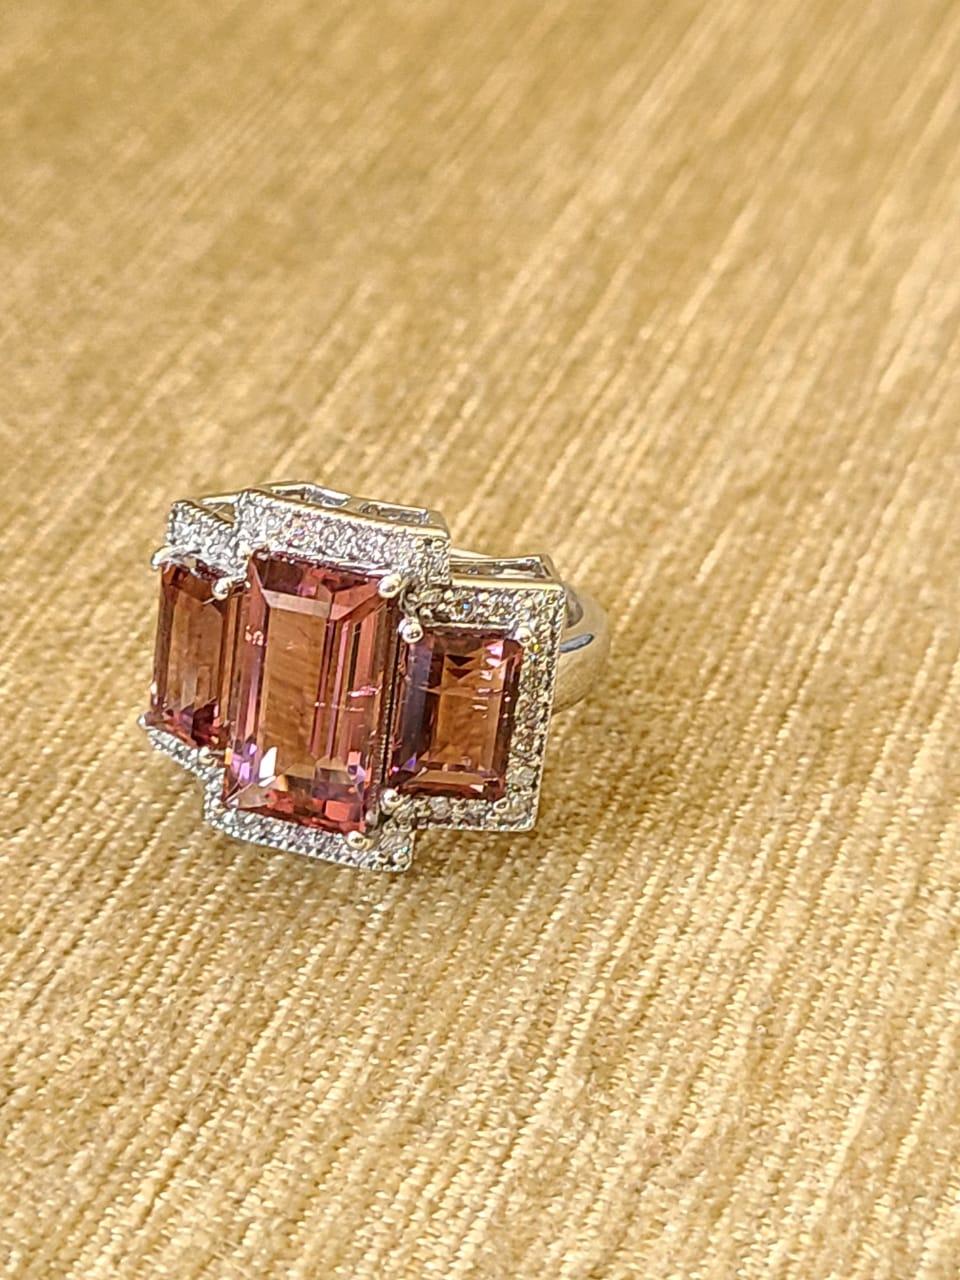 A gorgeous and very wearable Tourmaline & Diamonds cocktail Ring set in 18K Gold. The weight of the Tourmaline is 7.08 carats. The Tourmalines are completely natural, without any treatment. The weight of the Diamonds is 0.52 carats. The dimensions